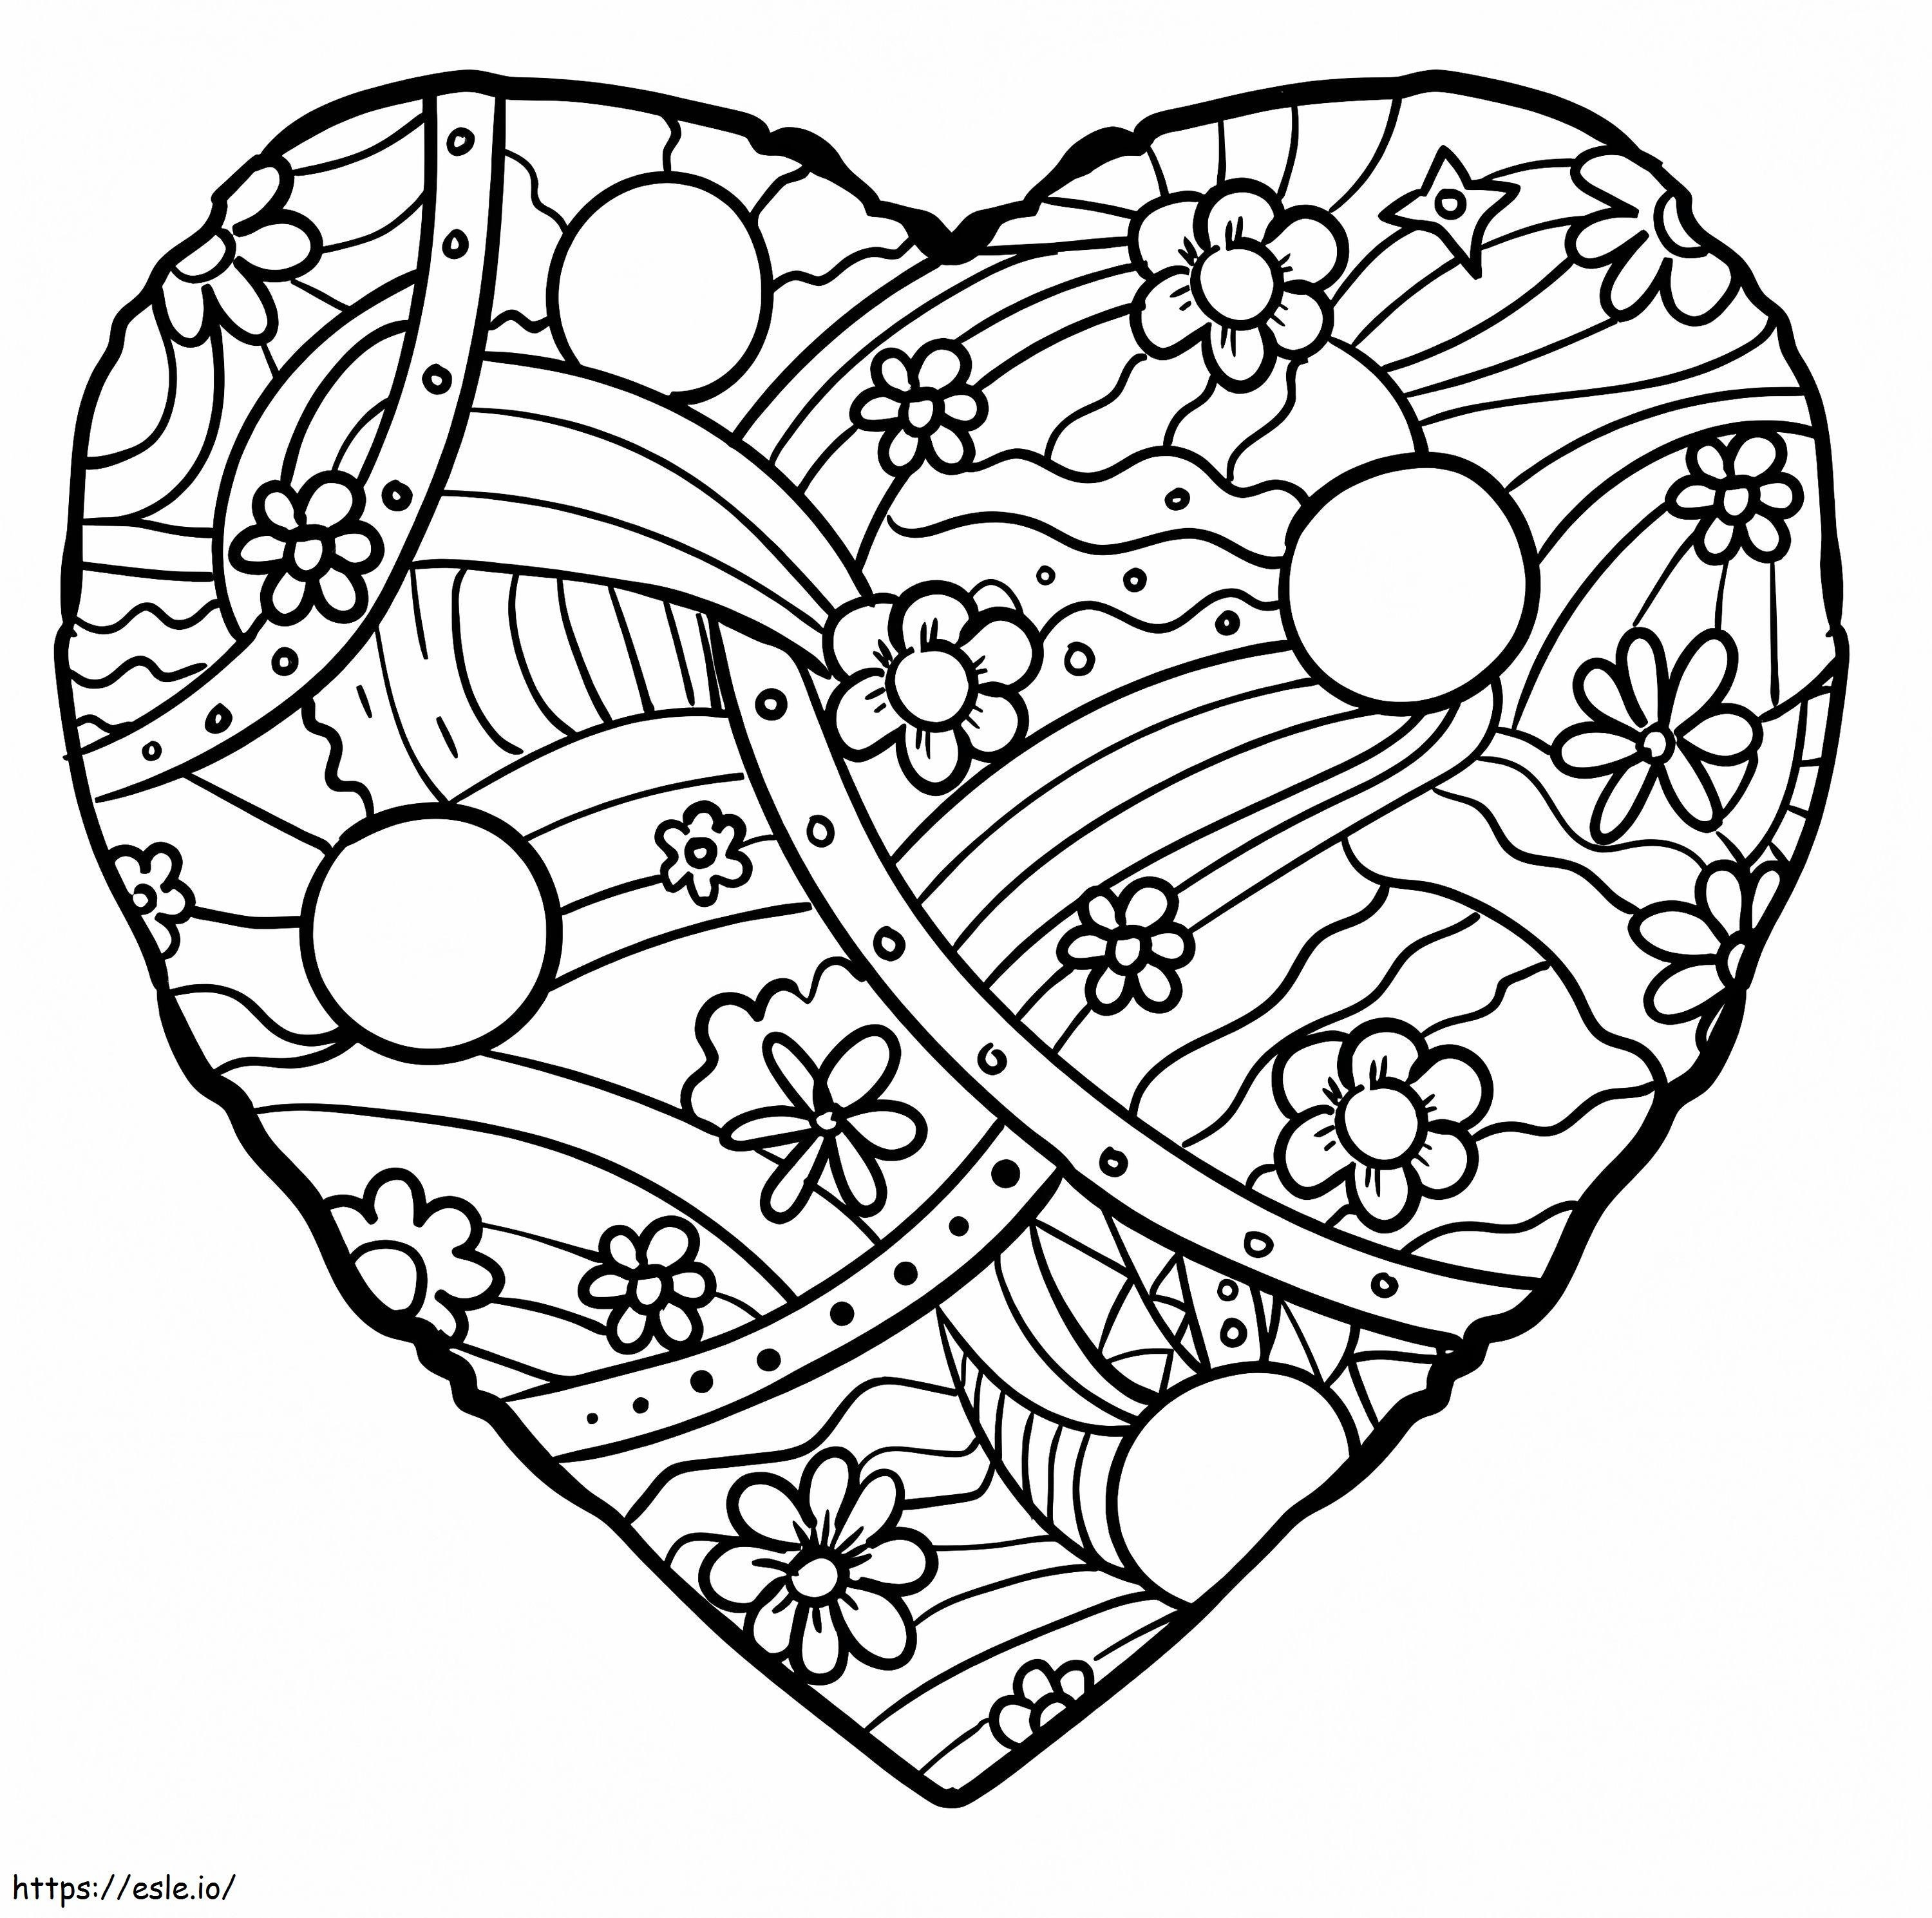 Nature Heart coloring page